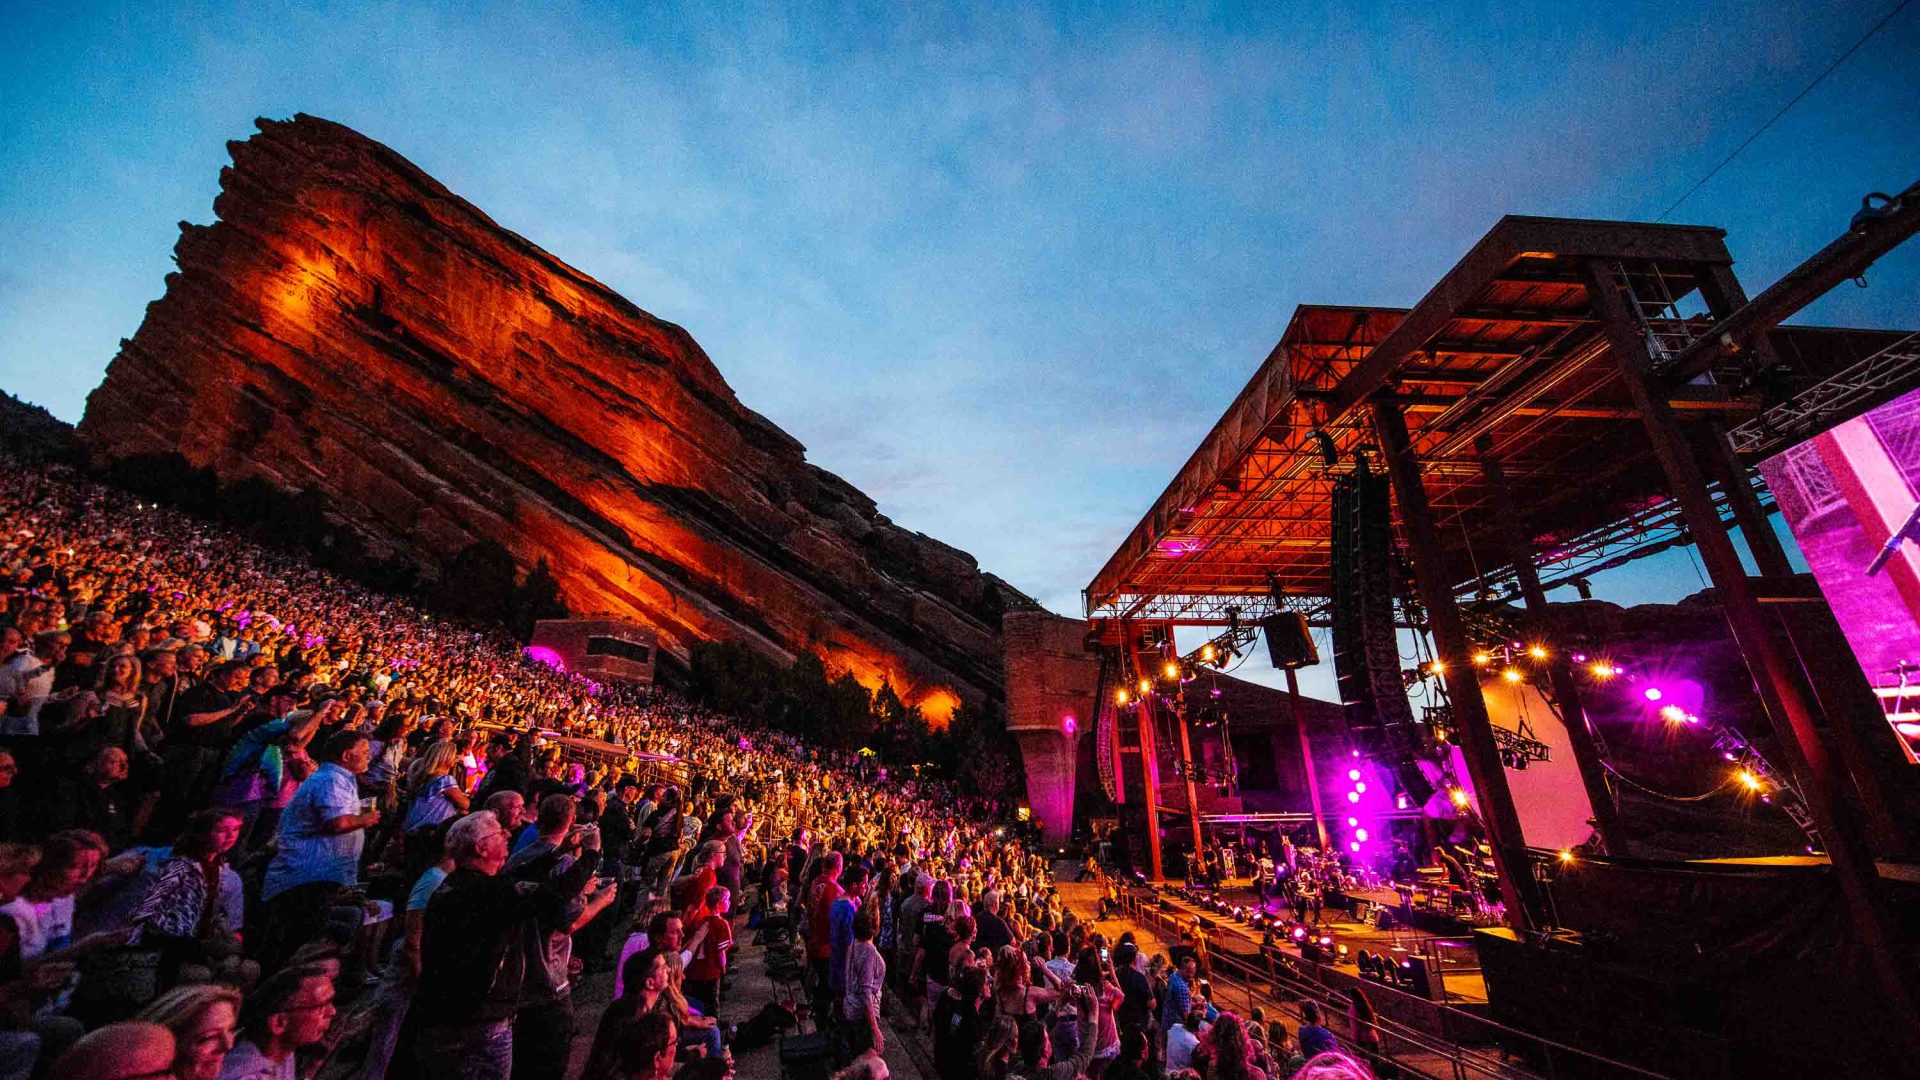 Red Rocks amphitheatre at night with a large audience.